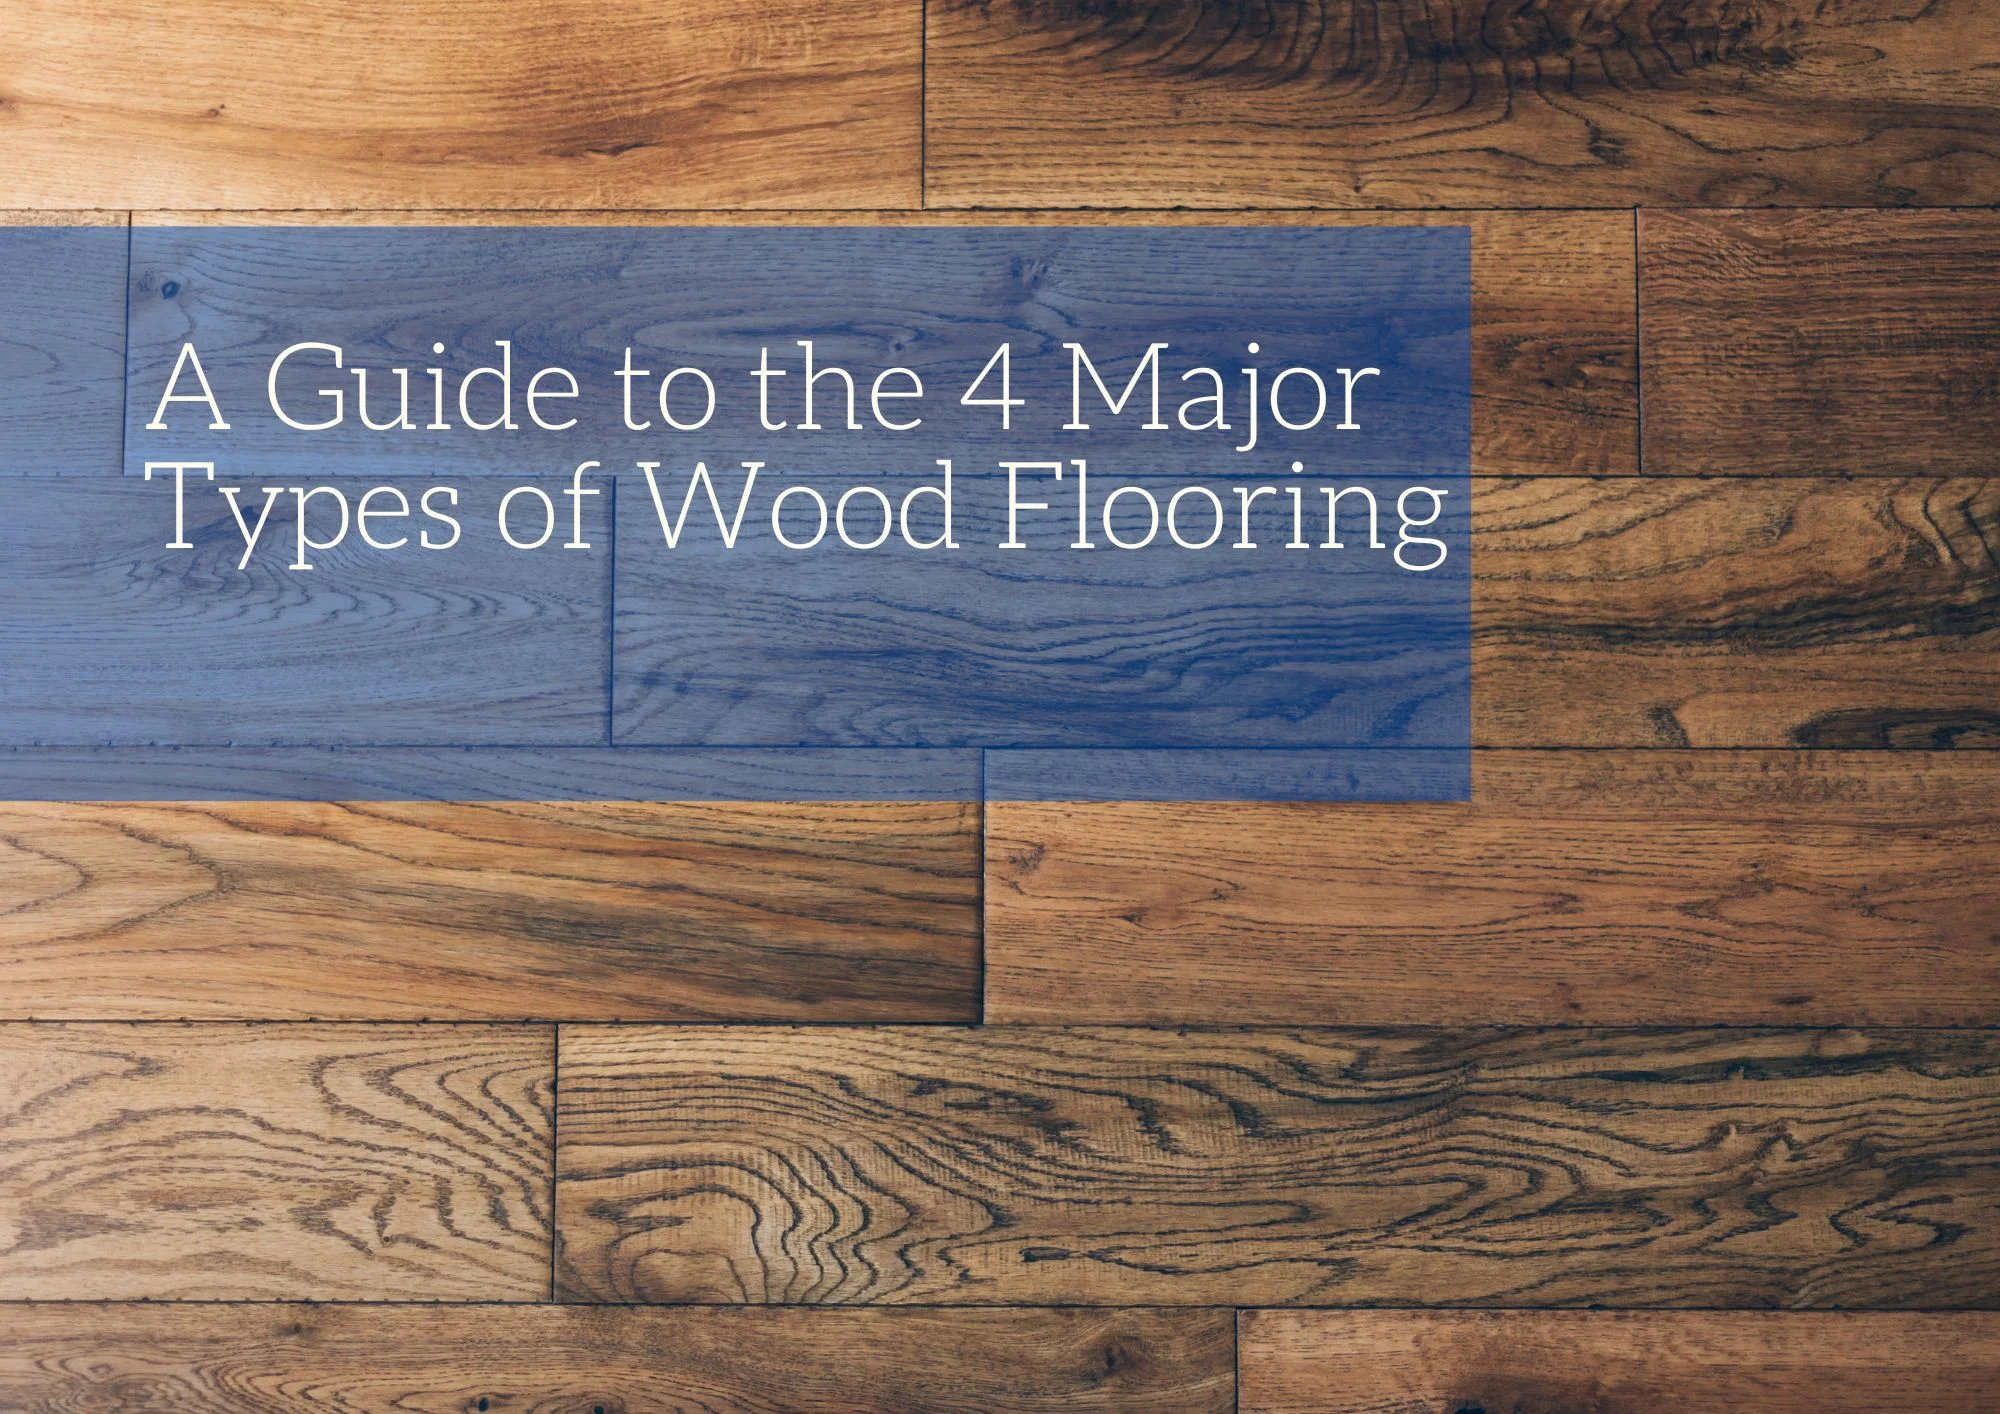 A Guide to the 4 Major Types of Wood Flooring